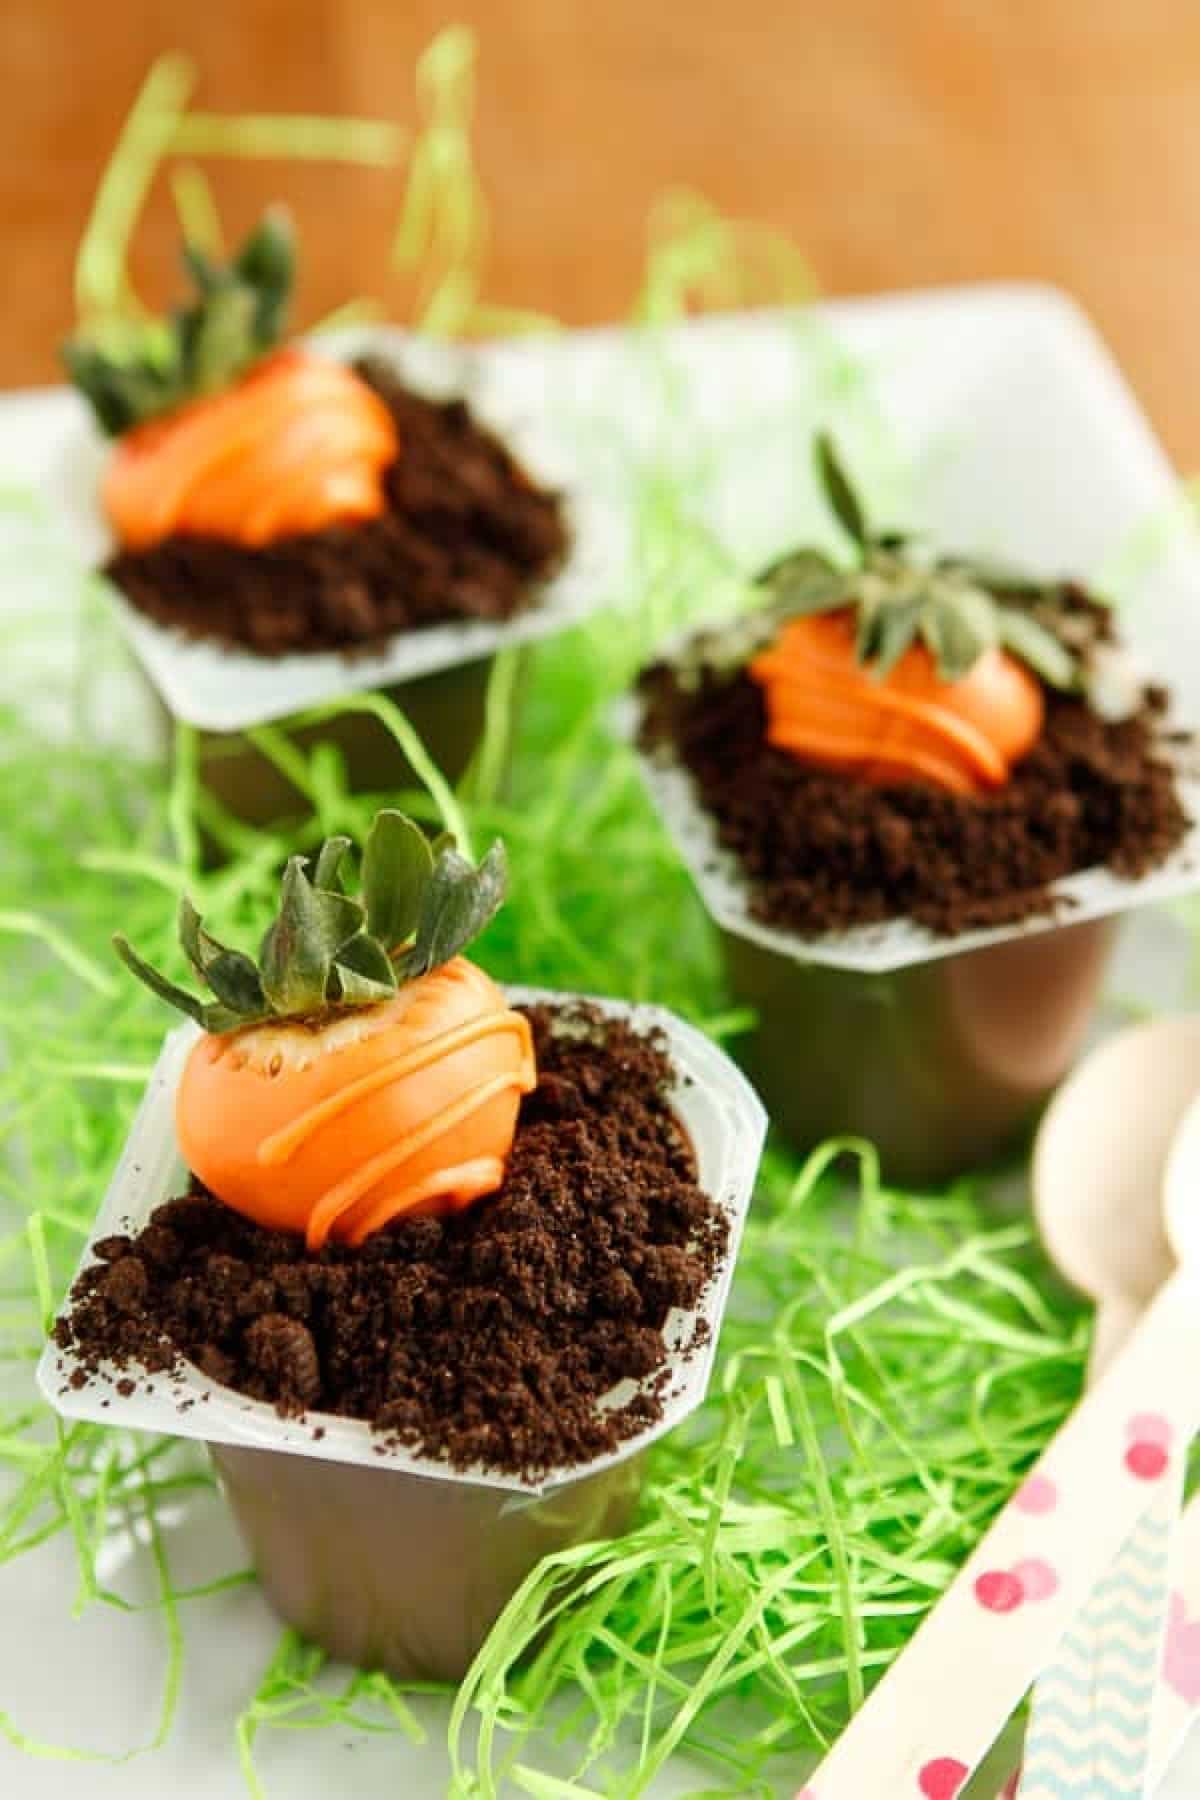 Three Carrot Patch Oreo Dirt Cups on a plate.